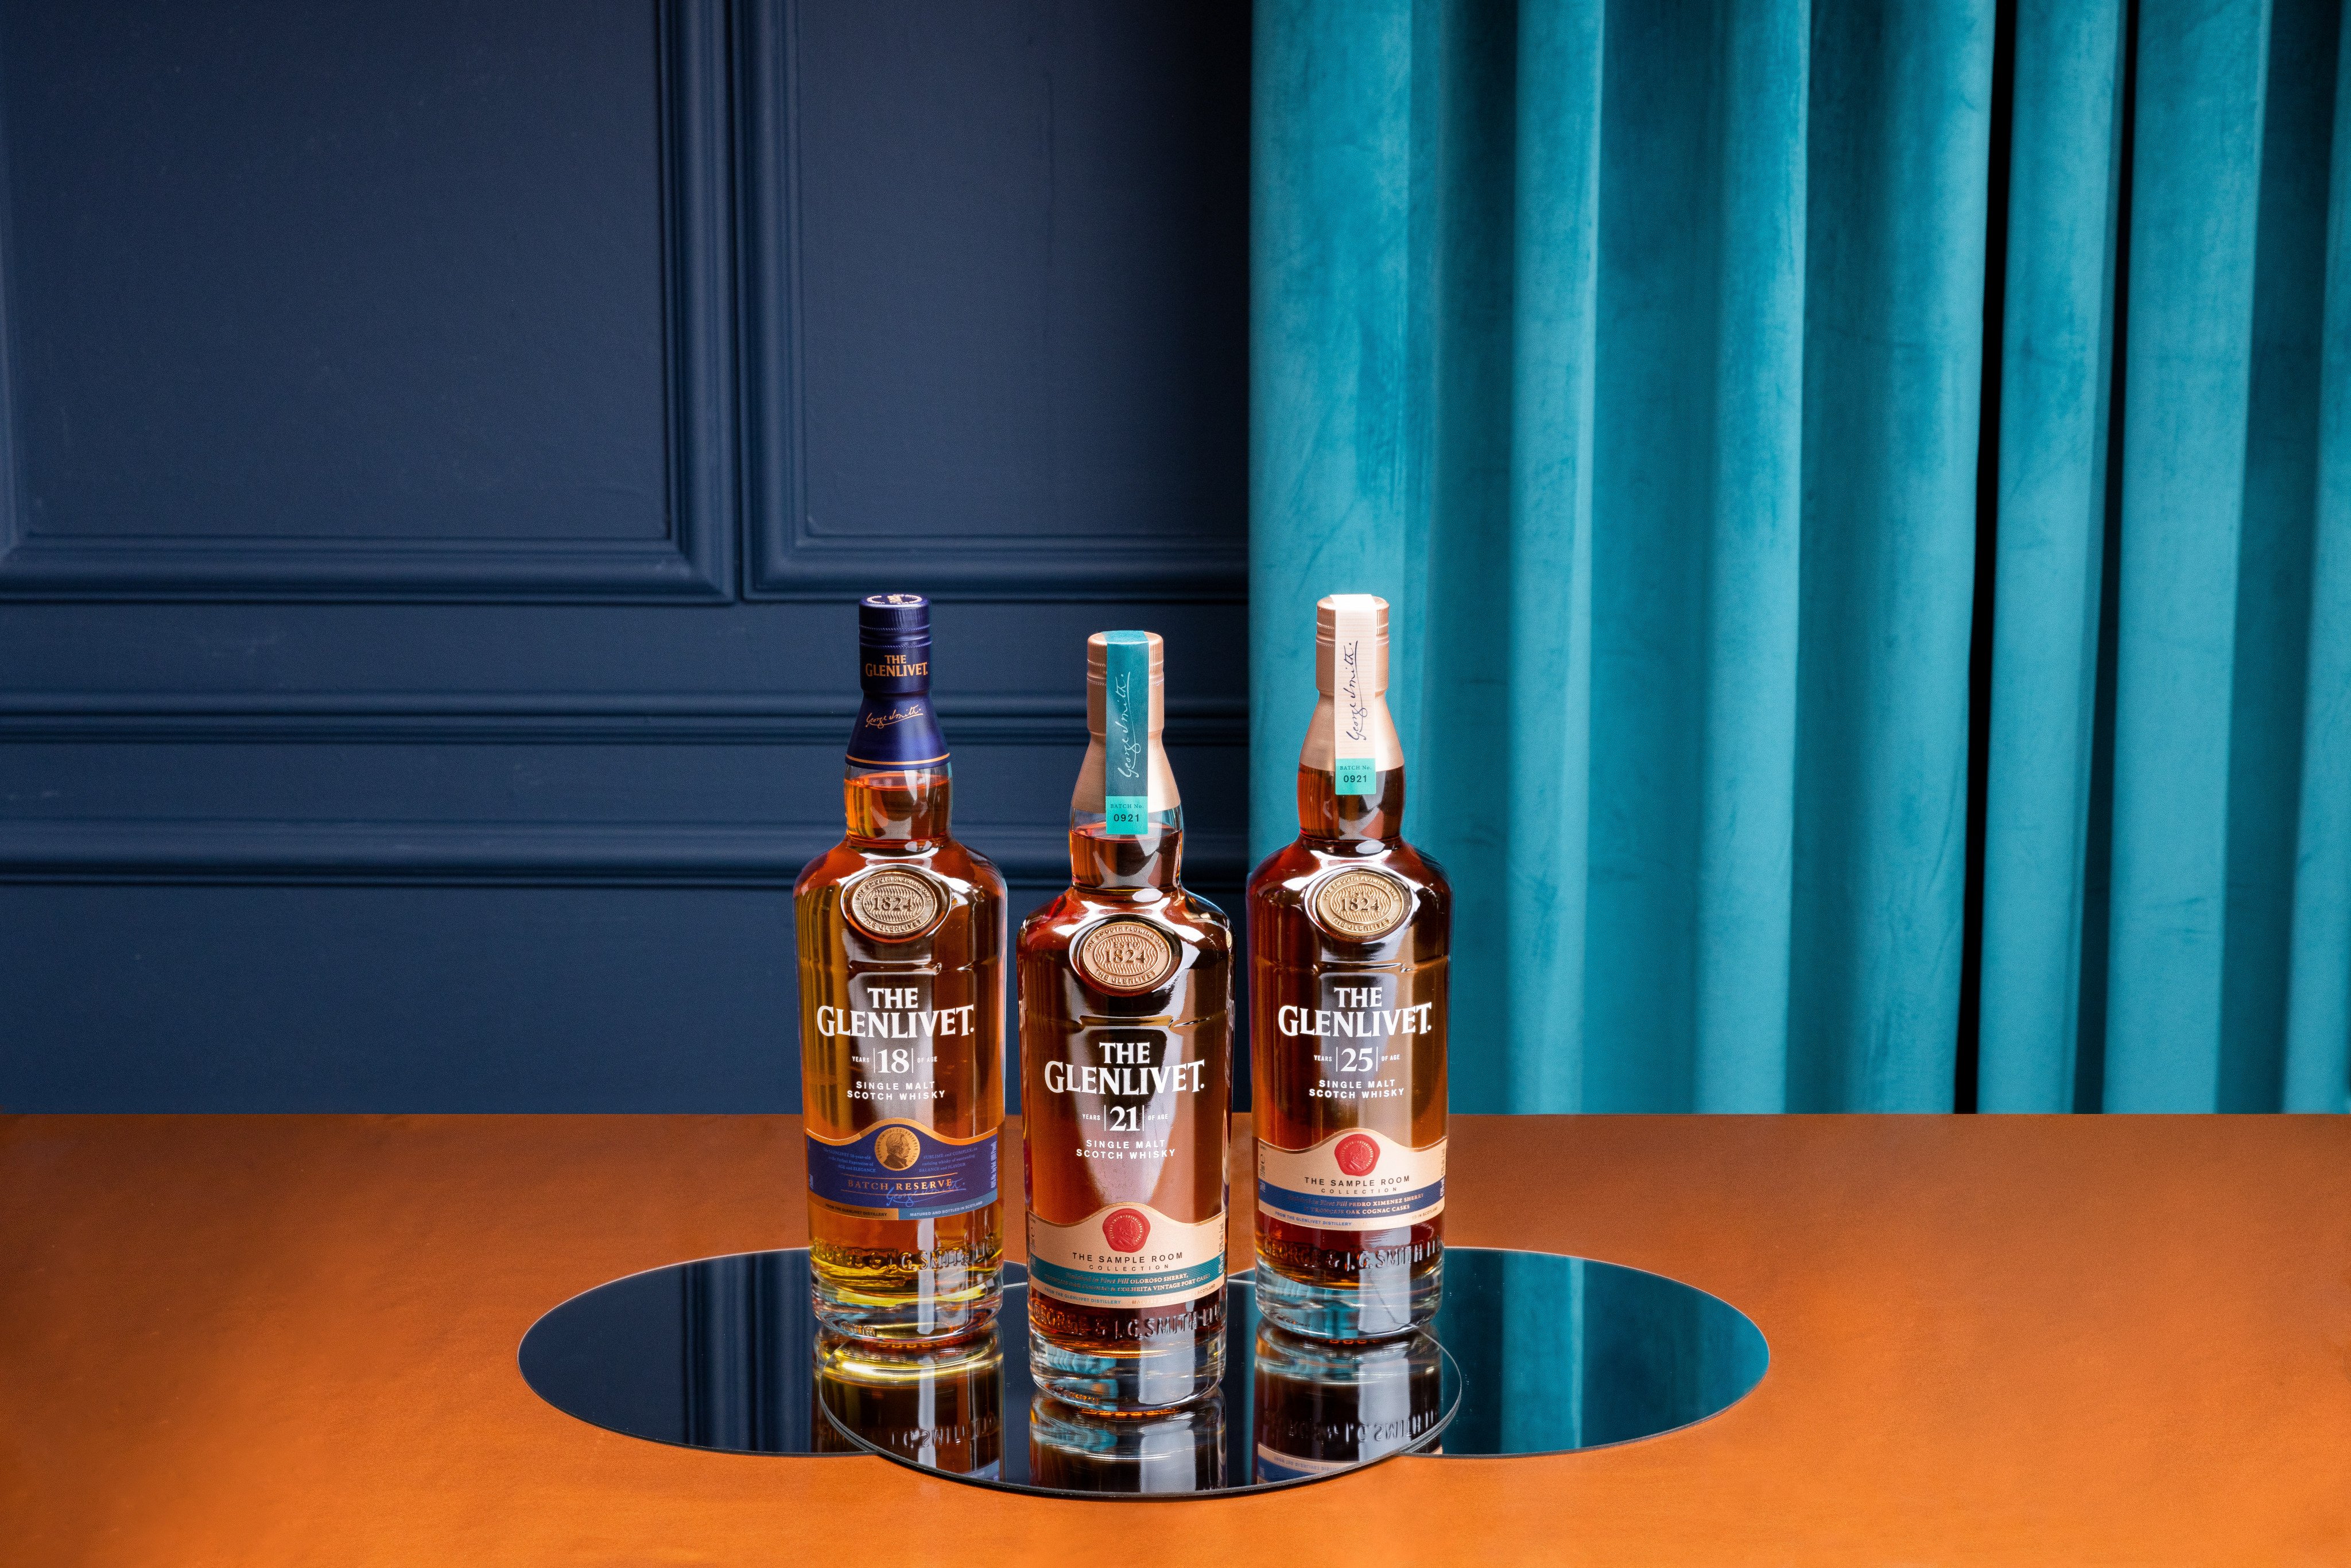 Glenlivet is one of the most popular single malt whiskies on the market, but what’s the difference between single malts and blended whiskies? A Chivas Regal master blender helps us understand what separates the two categories of whisky. Photo: The Glenlivet